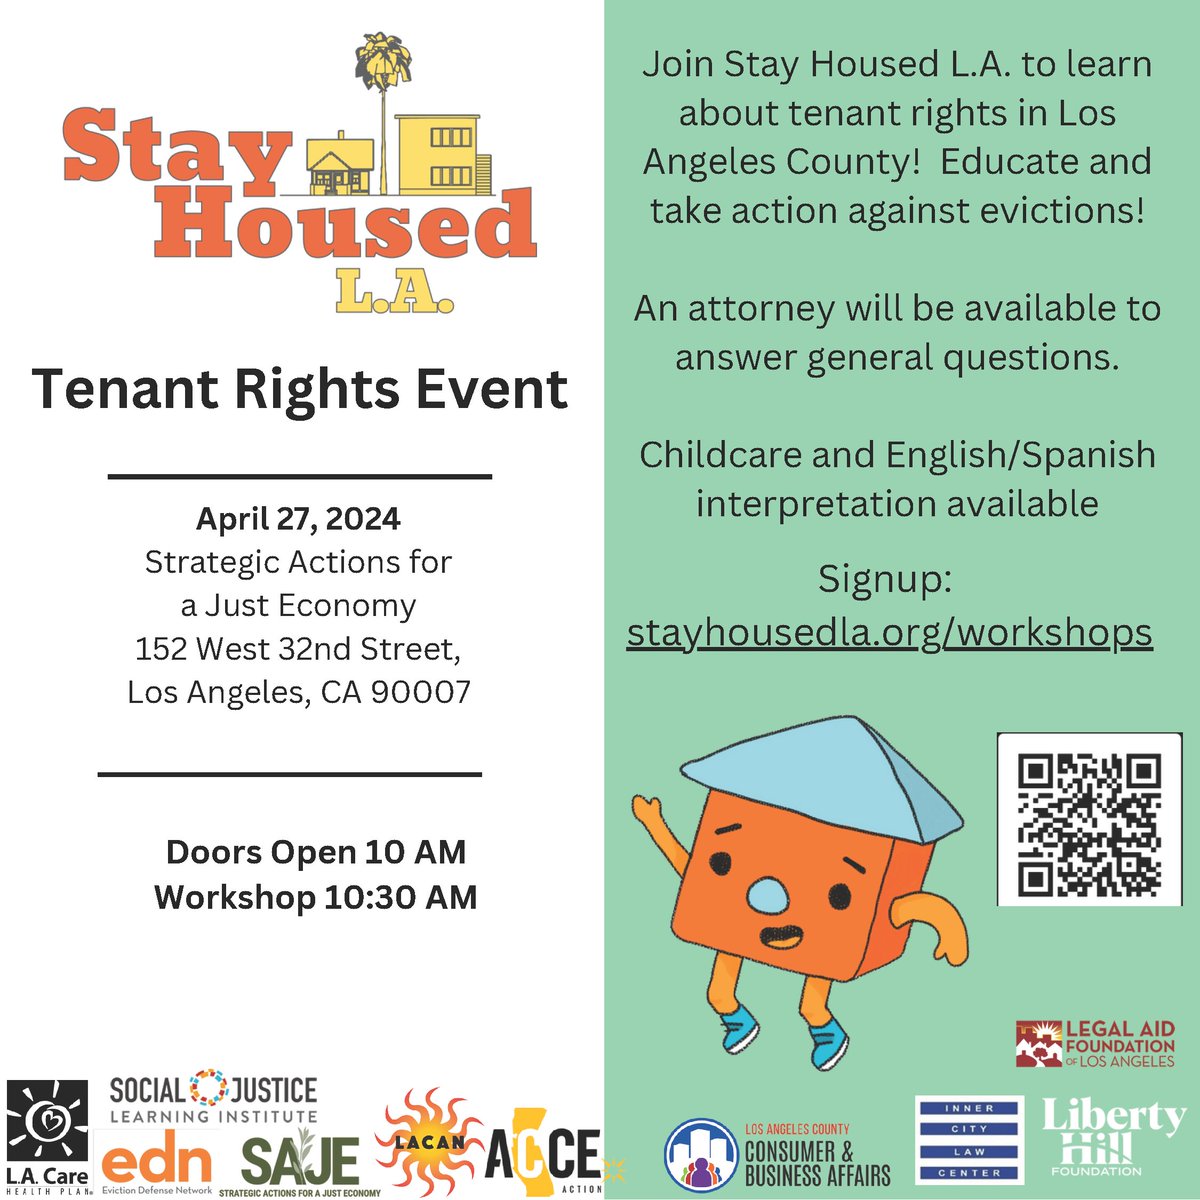 Learn about your rights as a tenant in #LACounty! Join @StayHousedLA TODAY 4/27 at 10am for an informative tenants rights workshop. An attorney will be present to answer general questions. Childcare and Spanish interpretation available. Signup now at stayhousedla.org/workshops